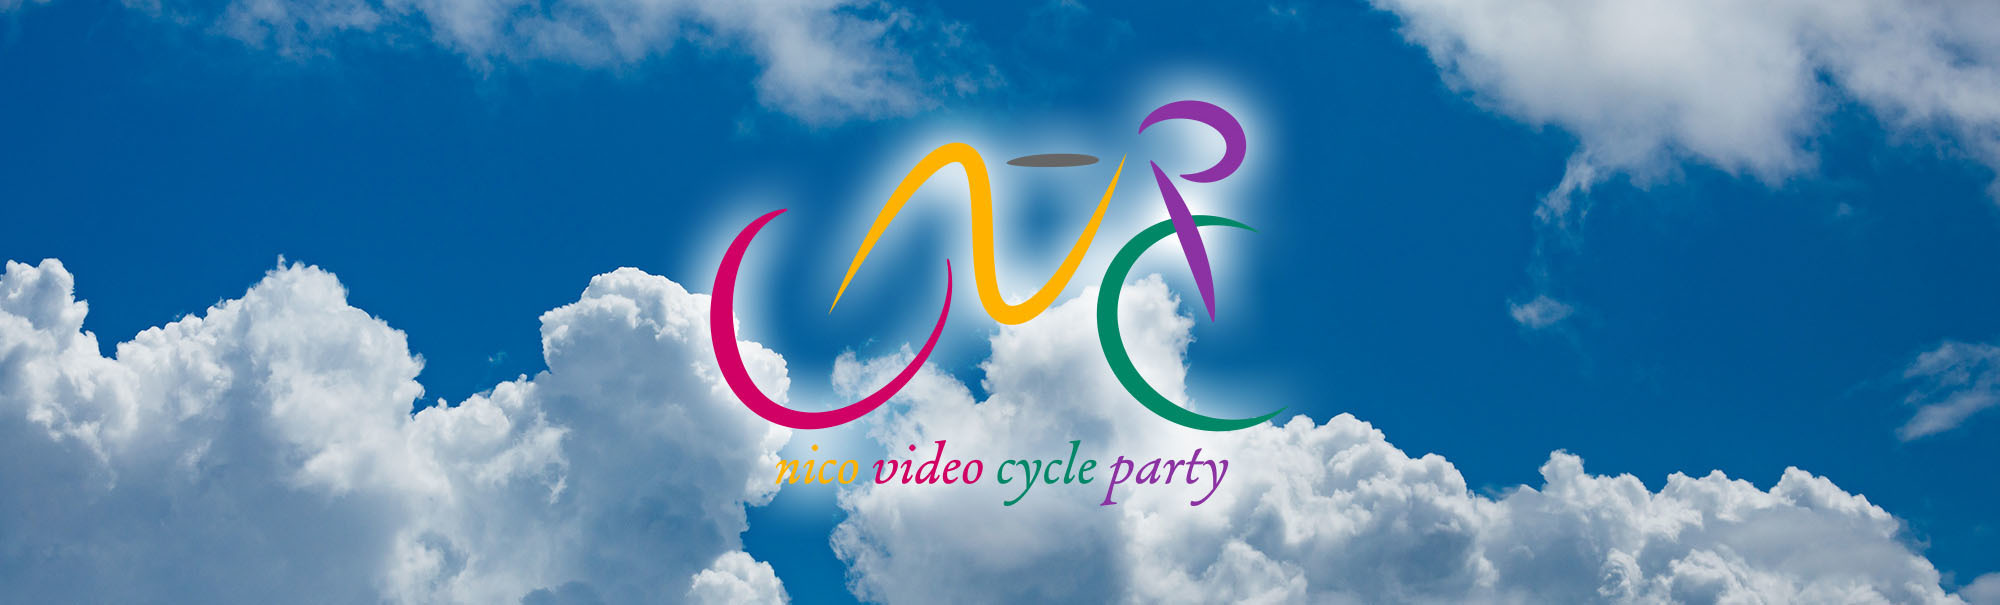 Nico Video Cycle Party